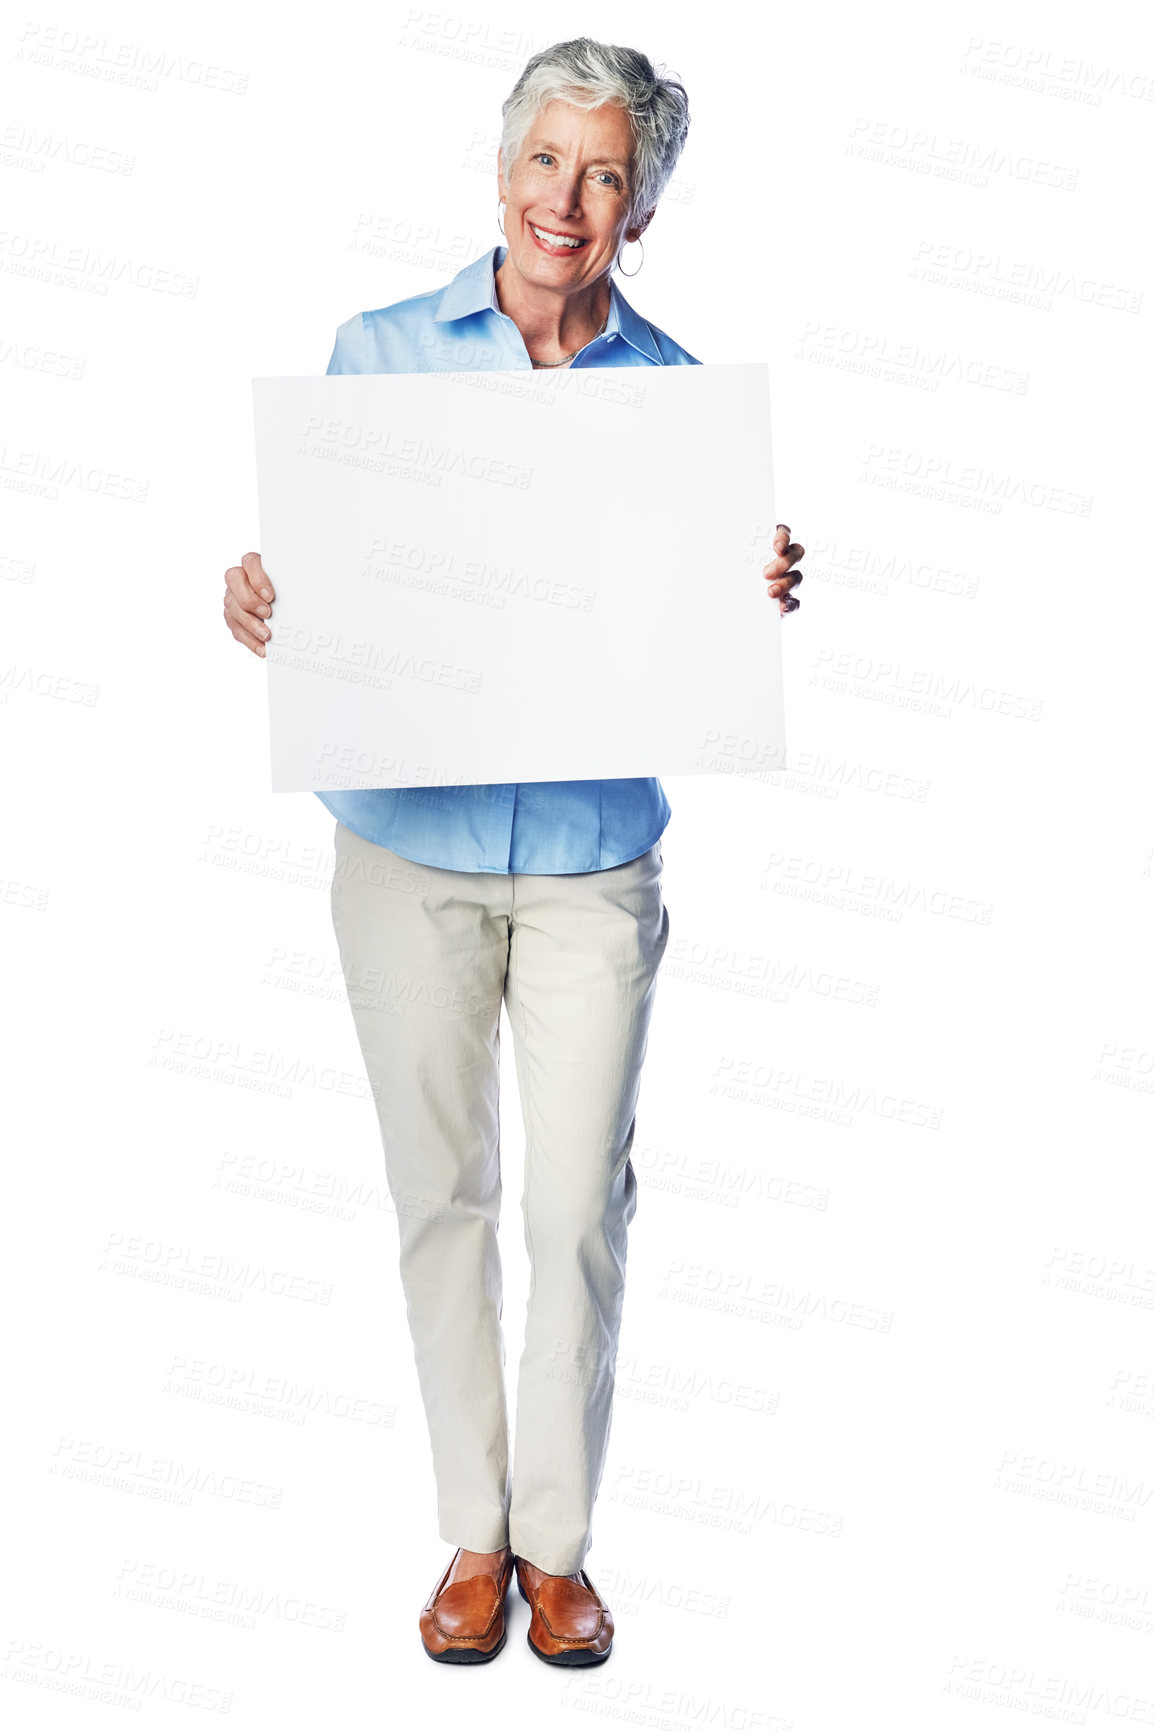 Buy stock photo Poster mockup, studio portrait and senior woman with marketing placard, advertising banner or product placement. Mock up, billboard promotion sign and happy sales model isolated on white background